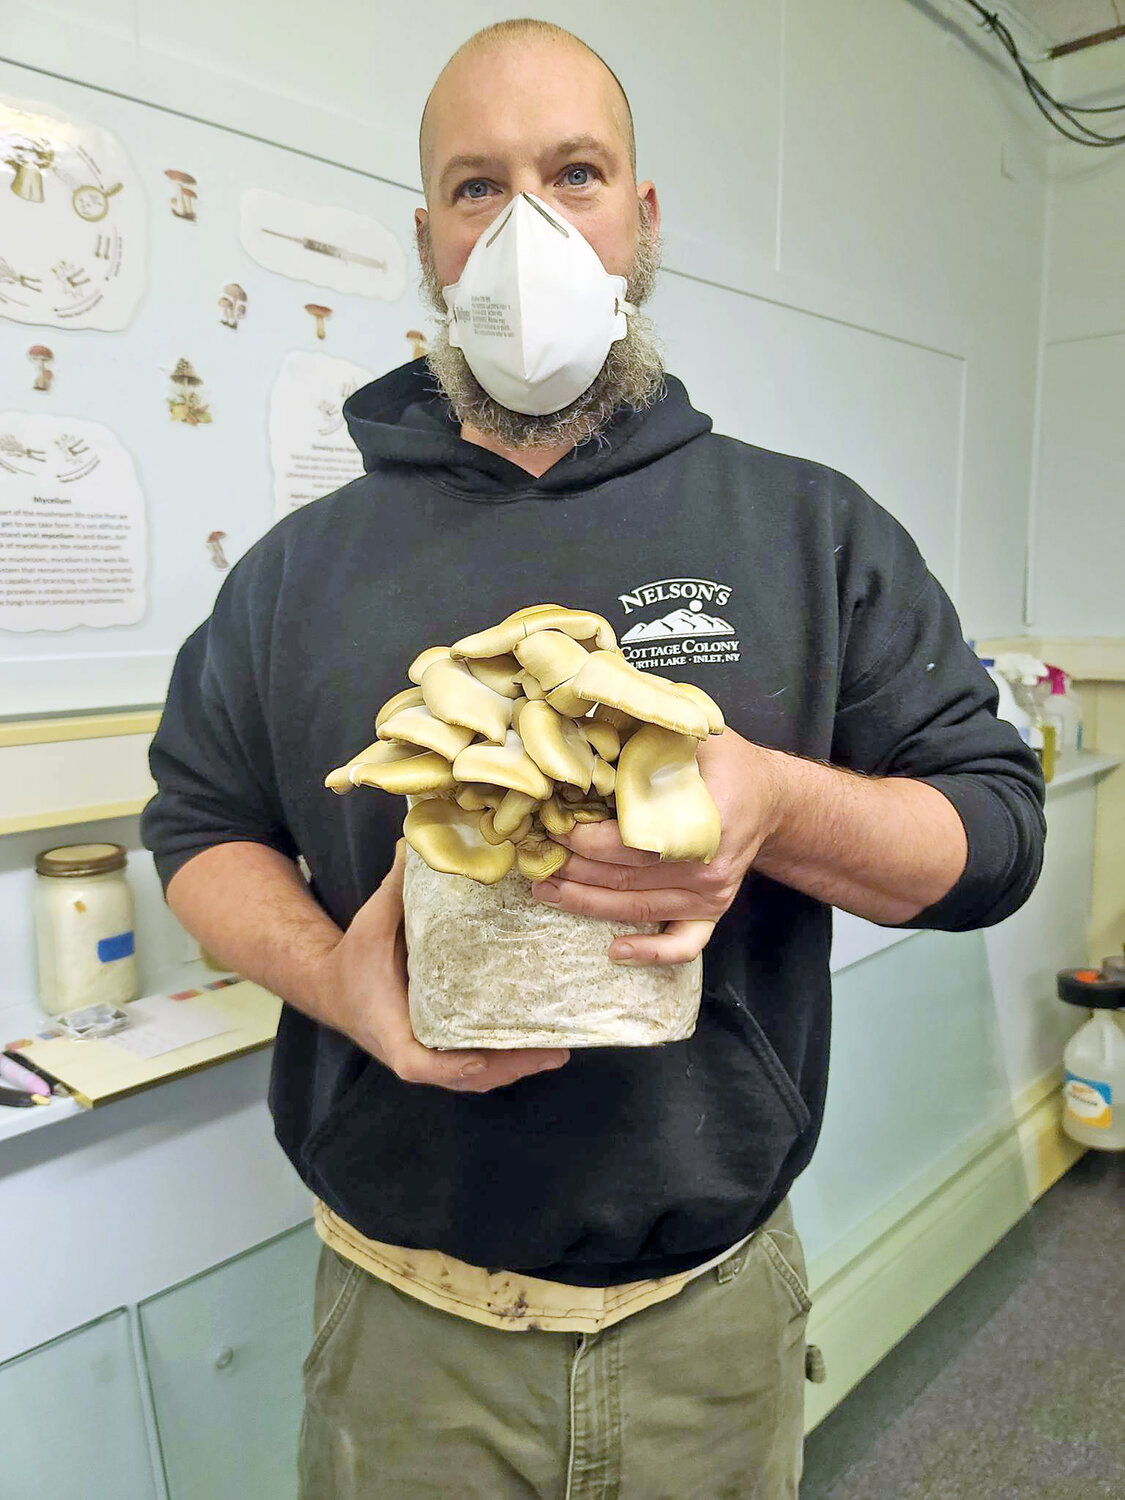 Local mycologist Tommy Hugh will explain mushroom gardens at 4 p.m. May 24 at Old Forge Library.